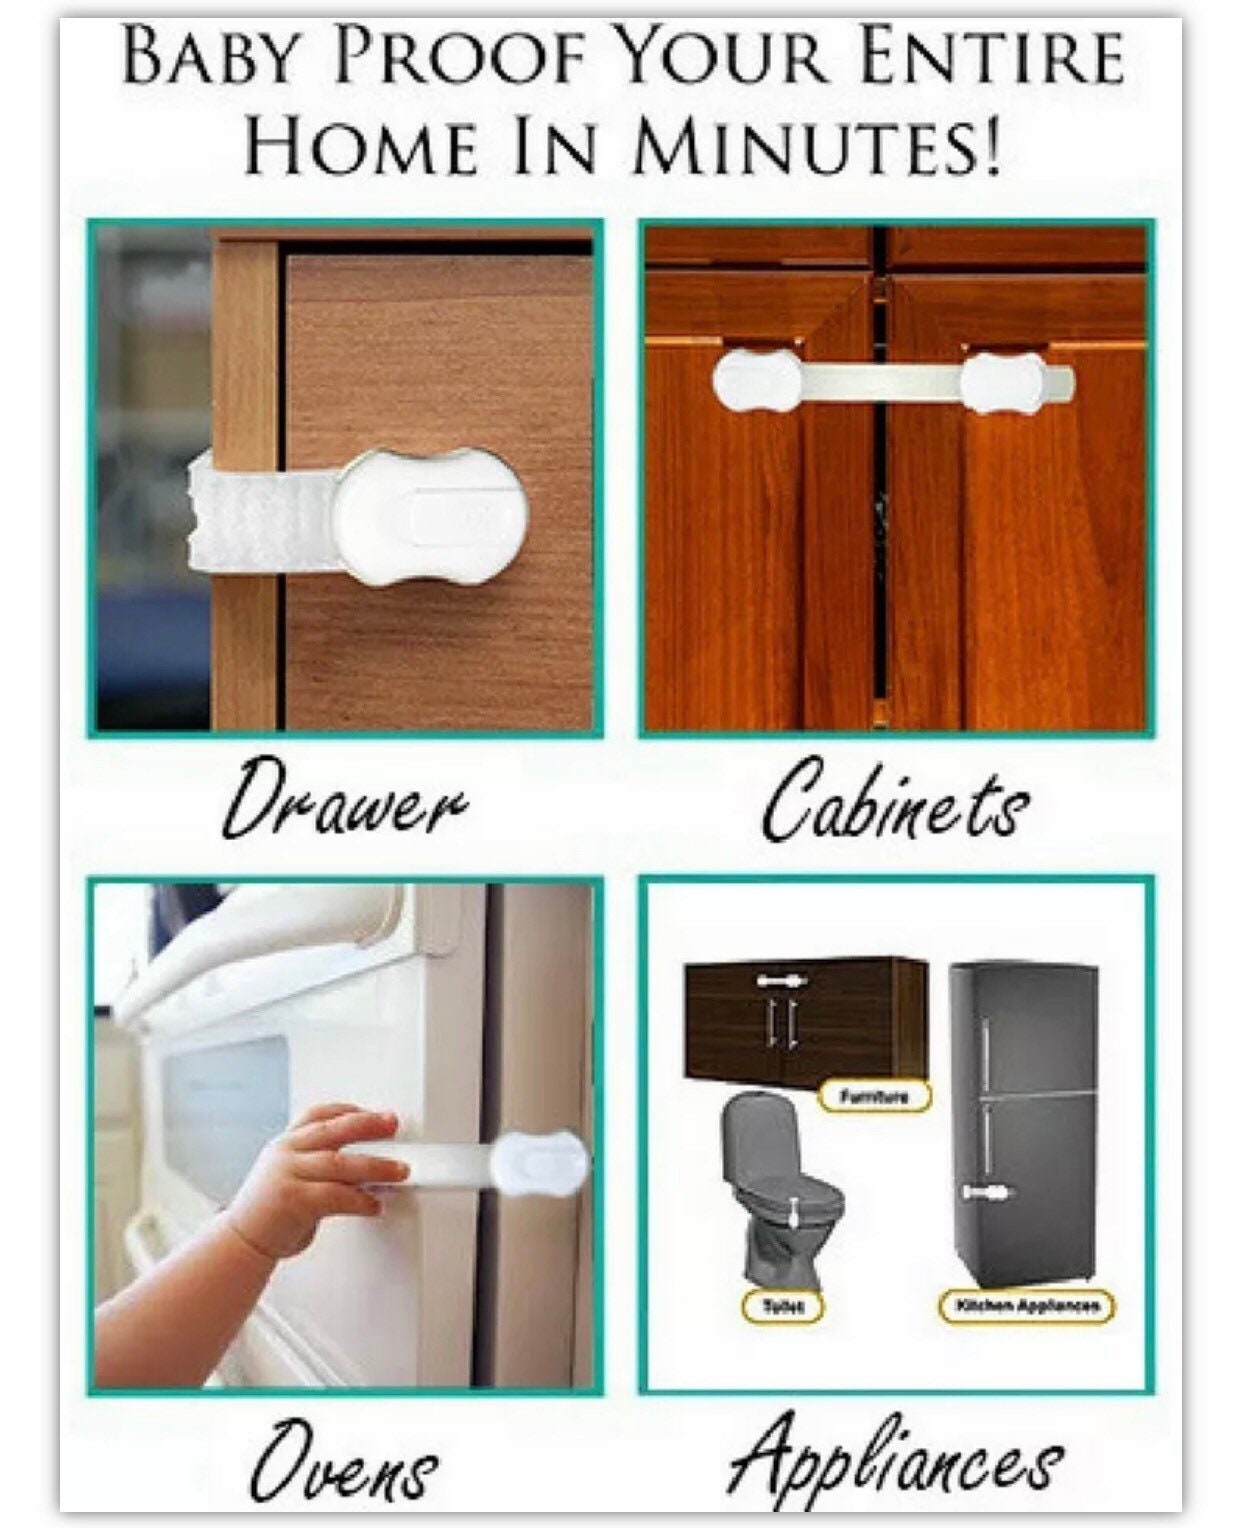 4our Kiddies Child Safety Cabinet Locks for Babies (6 Pack), Child Proof  Latches for Cabinets and